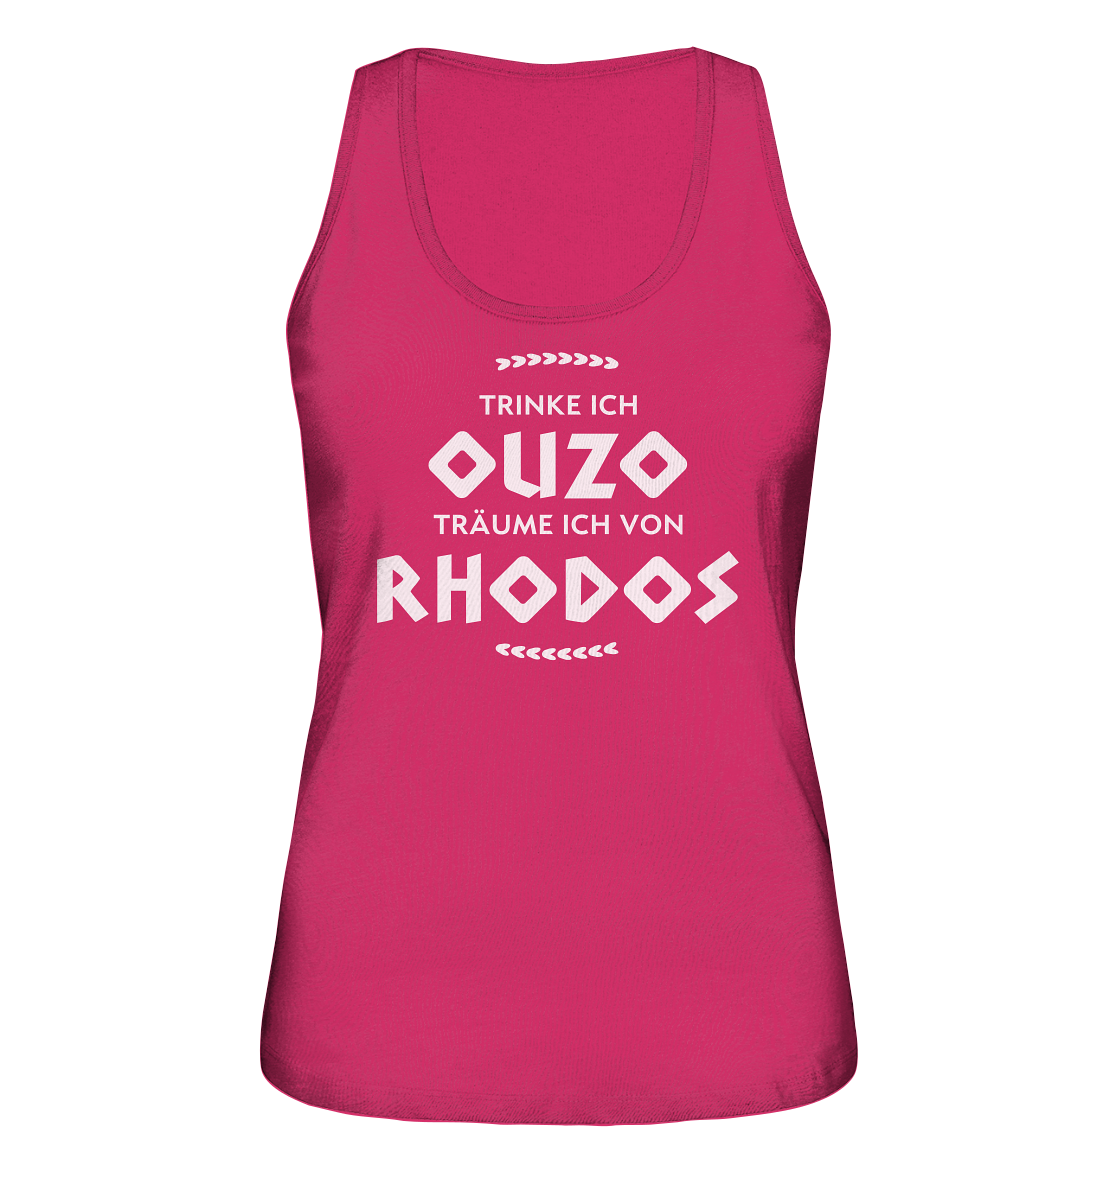 If I drink ouzo I dream of Rhodes - Ladies Organic Tank Top